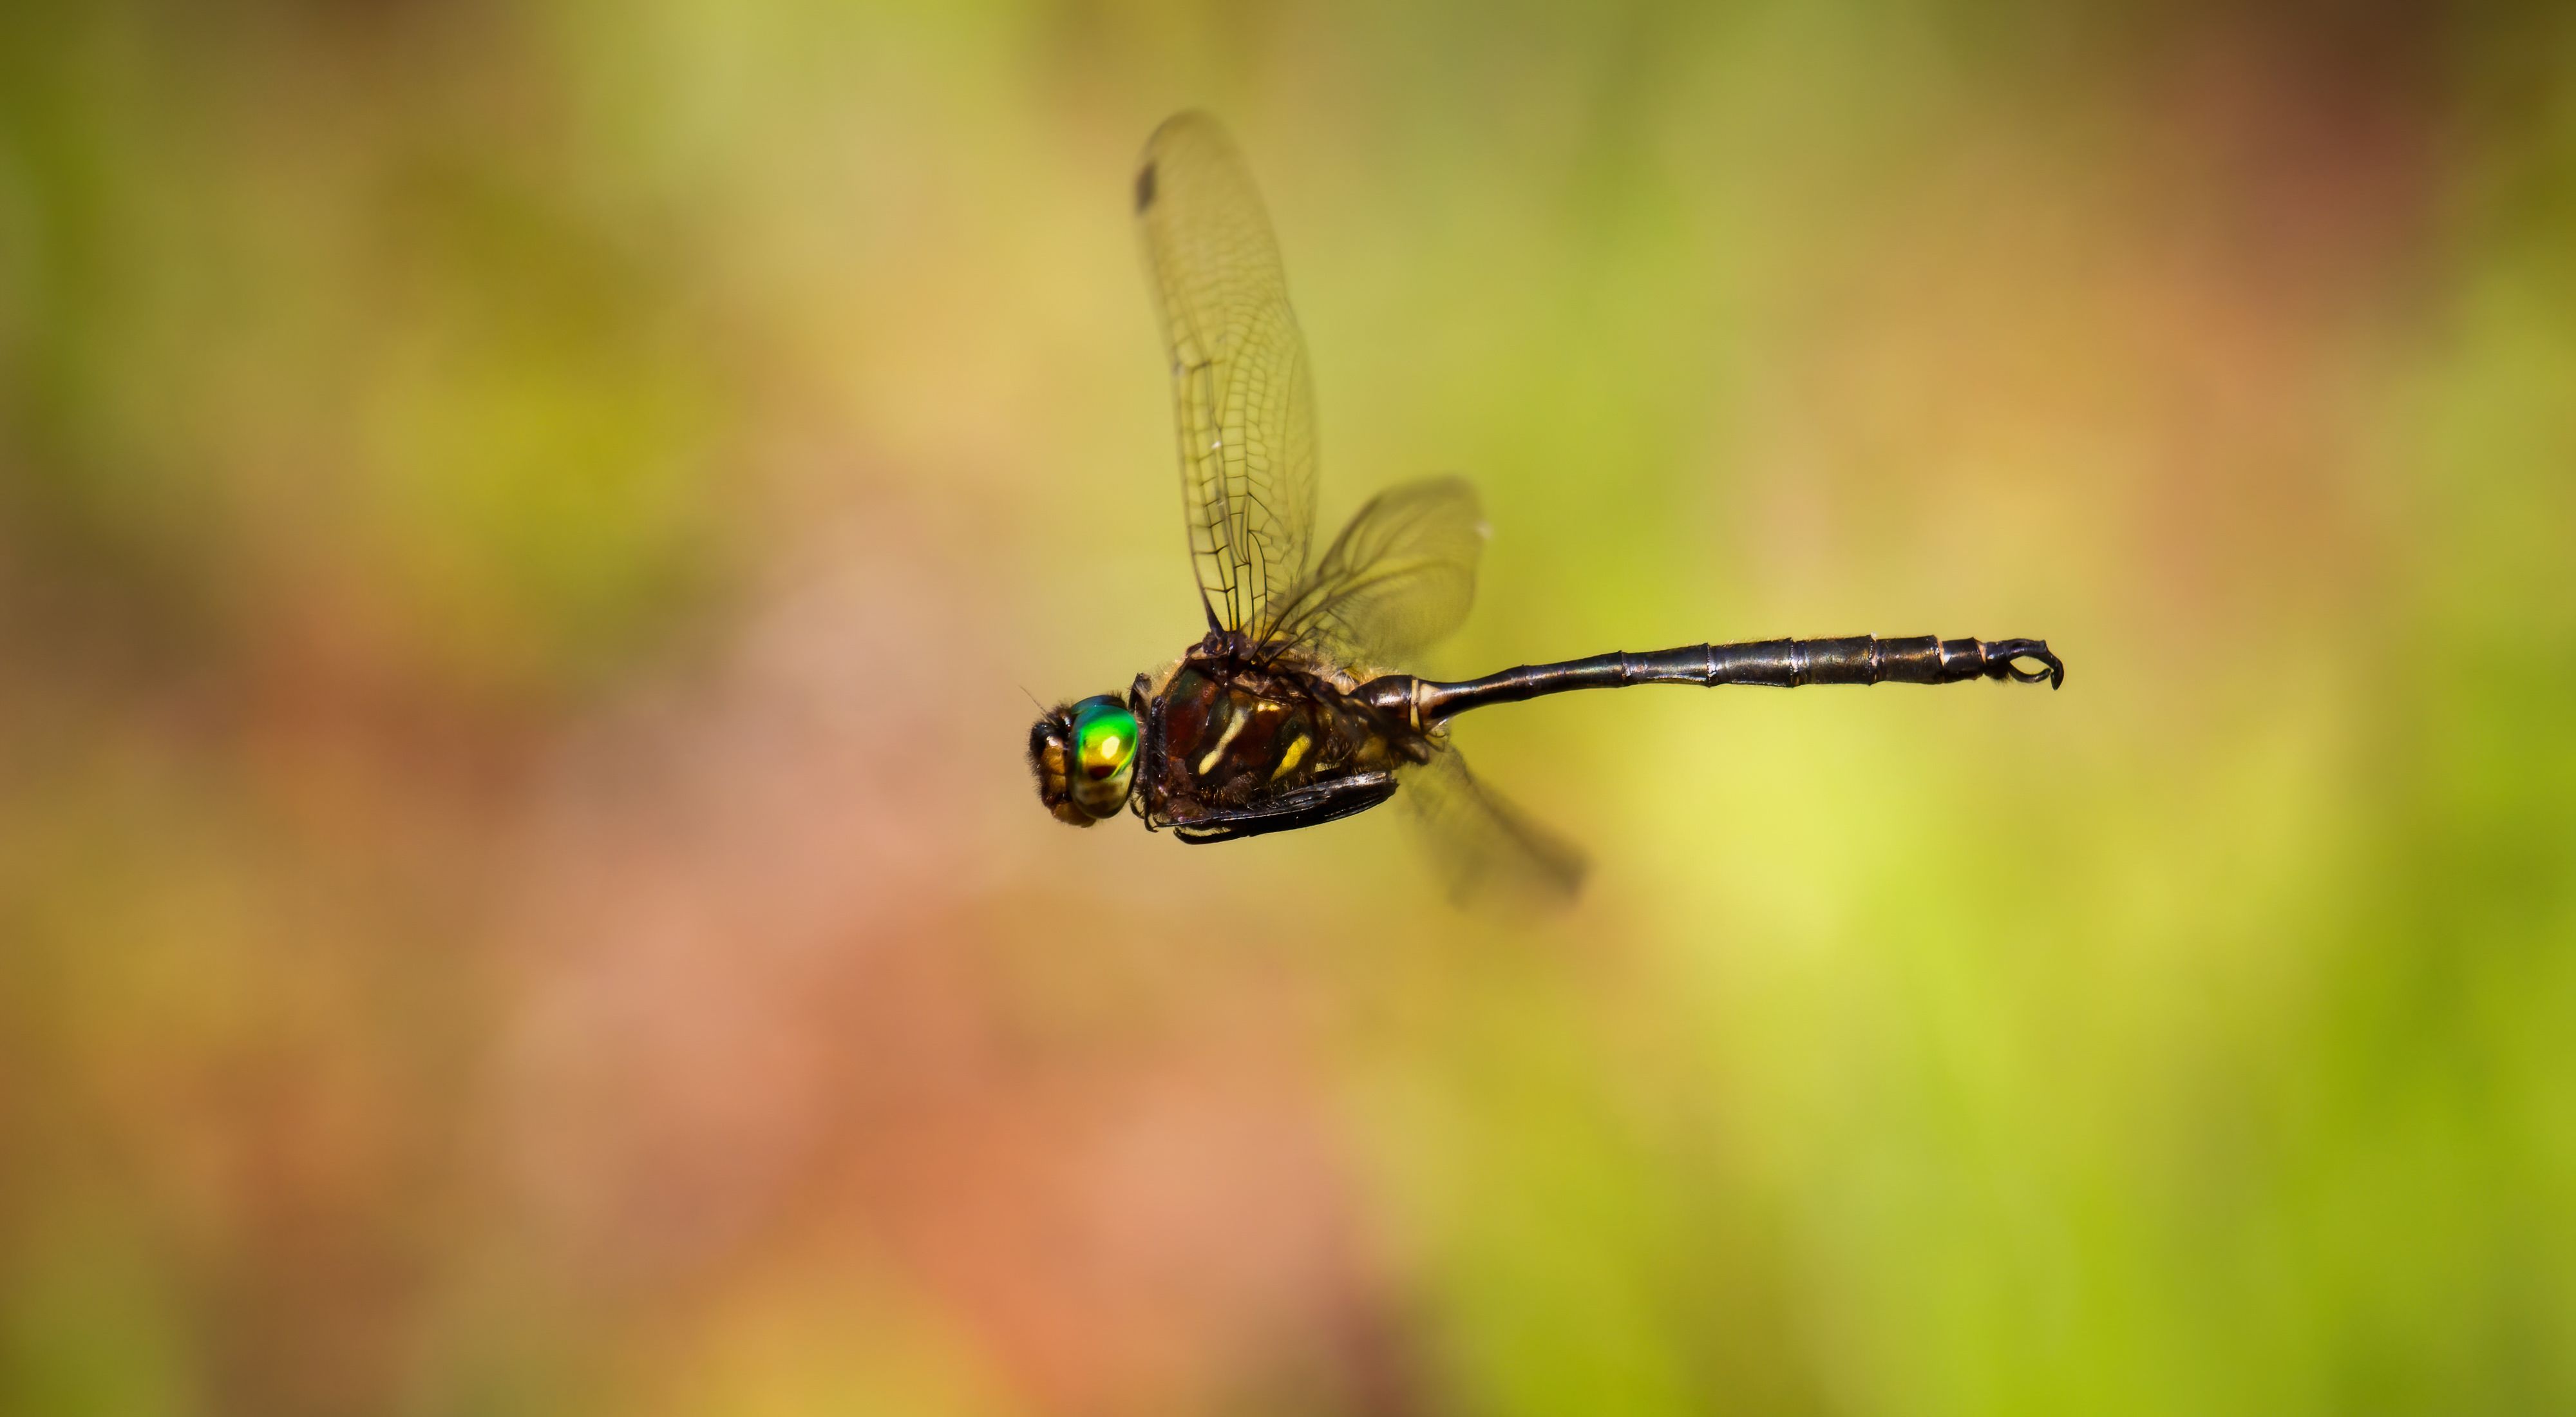 Darkly colored dragonfly with green head in flight.